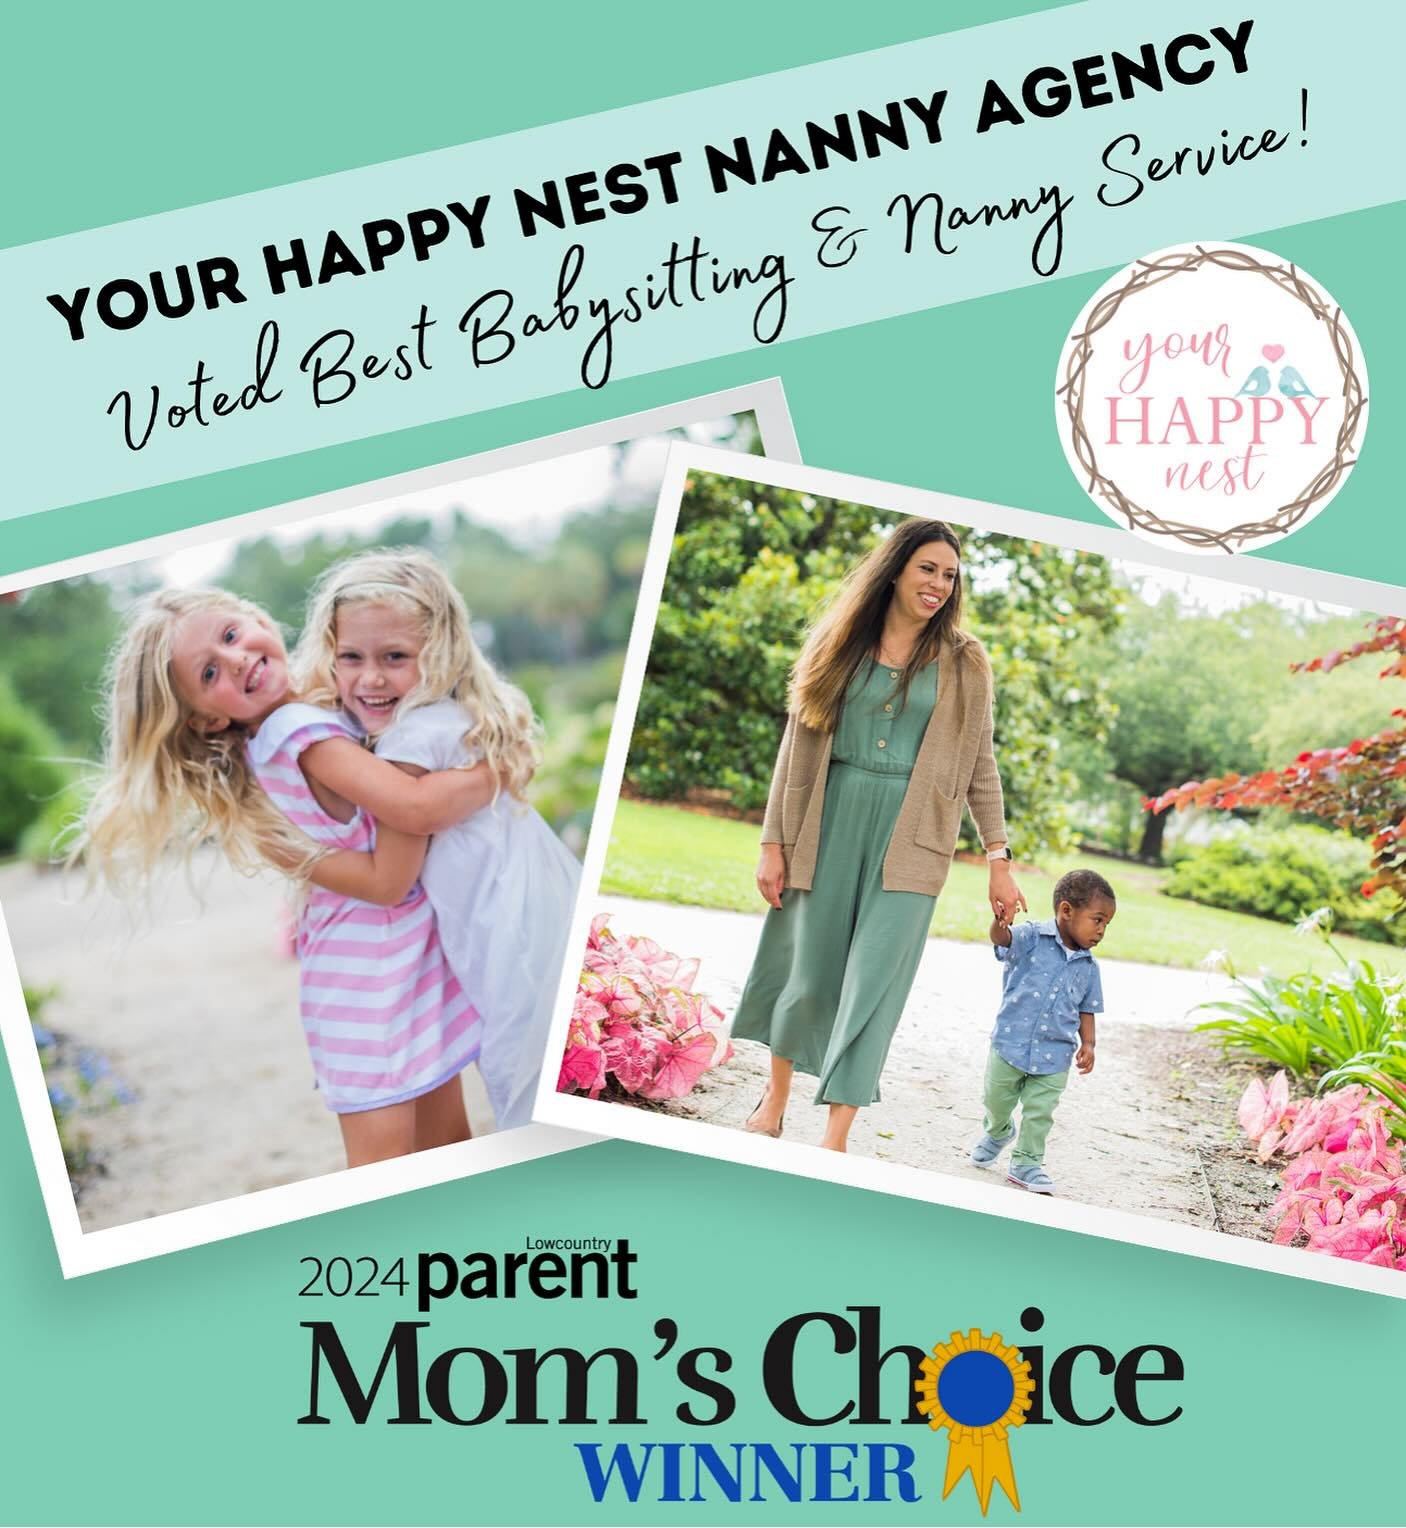 We are thrilled to announce that we were voted Best Nanny and Babysitting Service in Charleston by the Lowcountry Parent Magazine&rsquo;s Mom Choice Awards for the 5th year in a row! Check out this month&rsquo;s issue to see all of the winners as wel